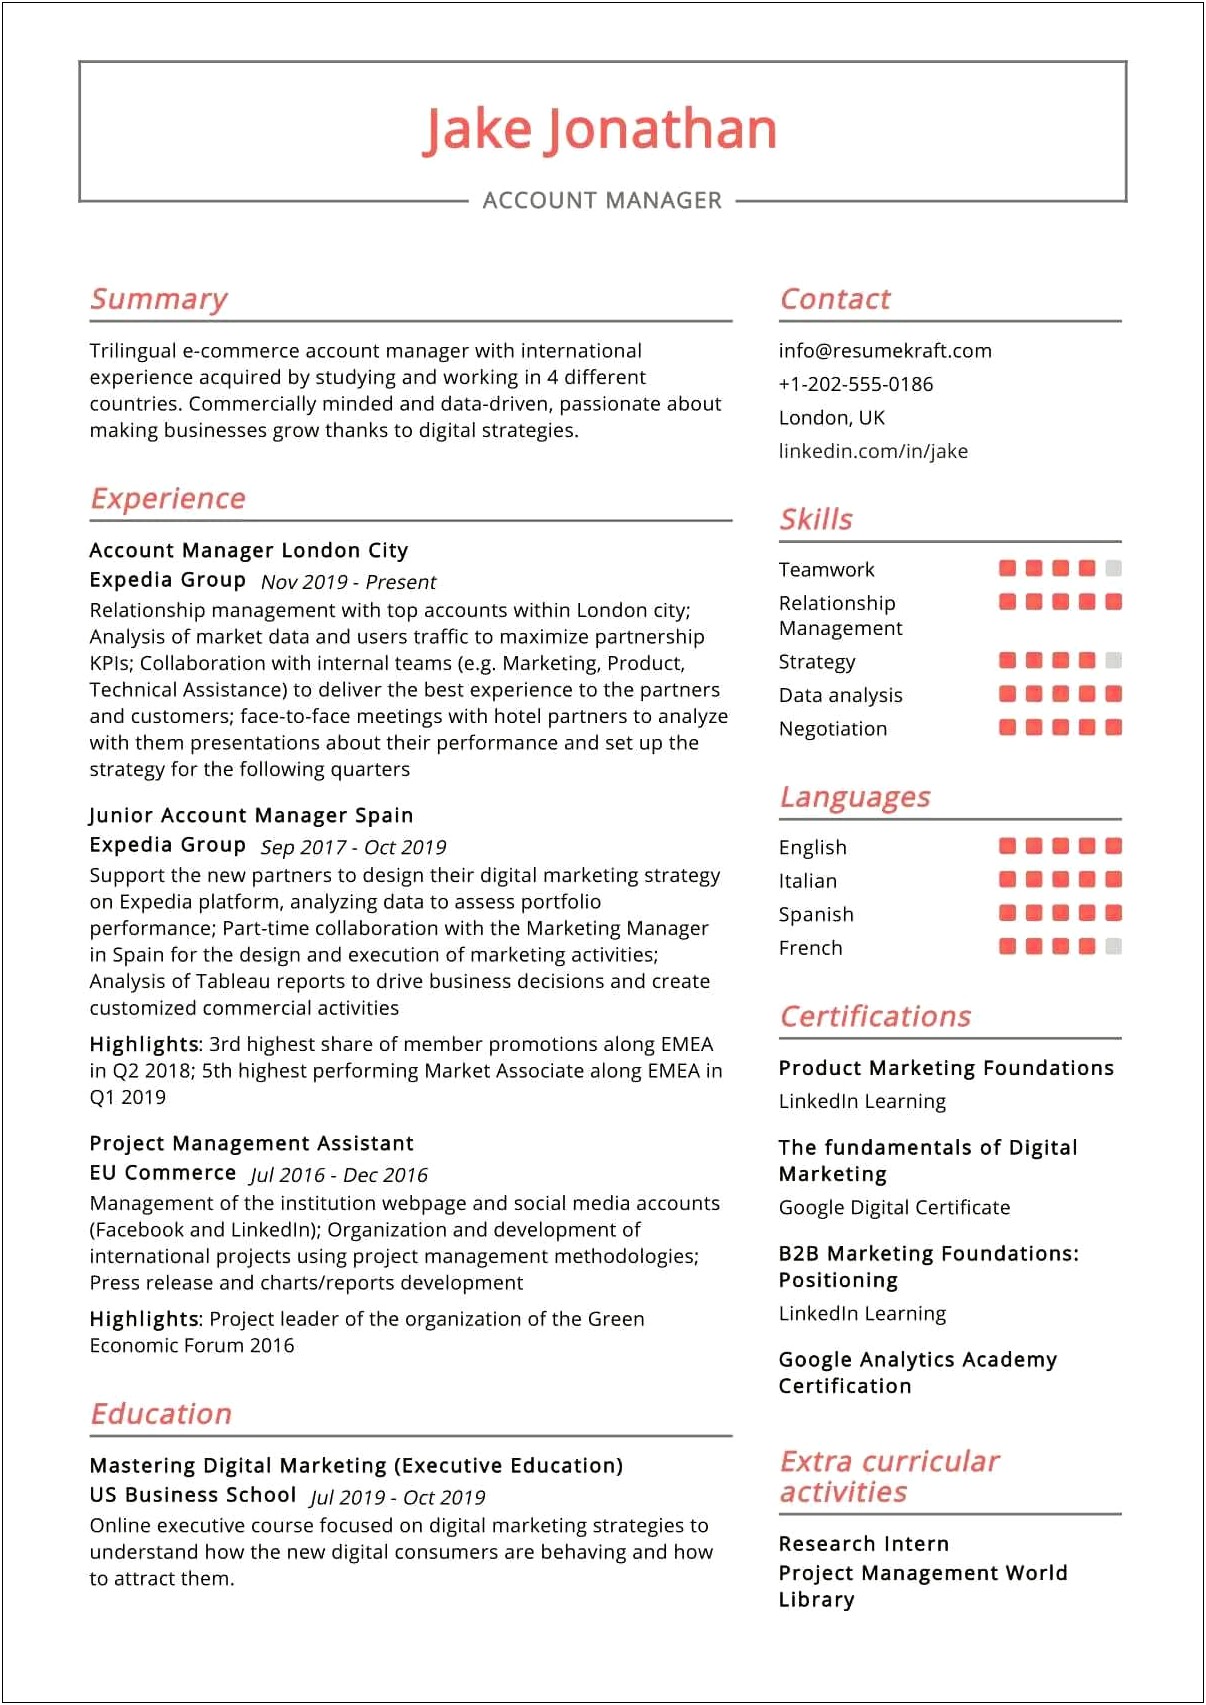 Resume On Client Relationship Manager In Hotels